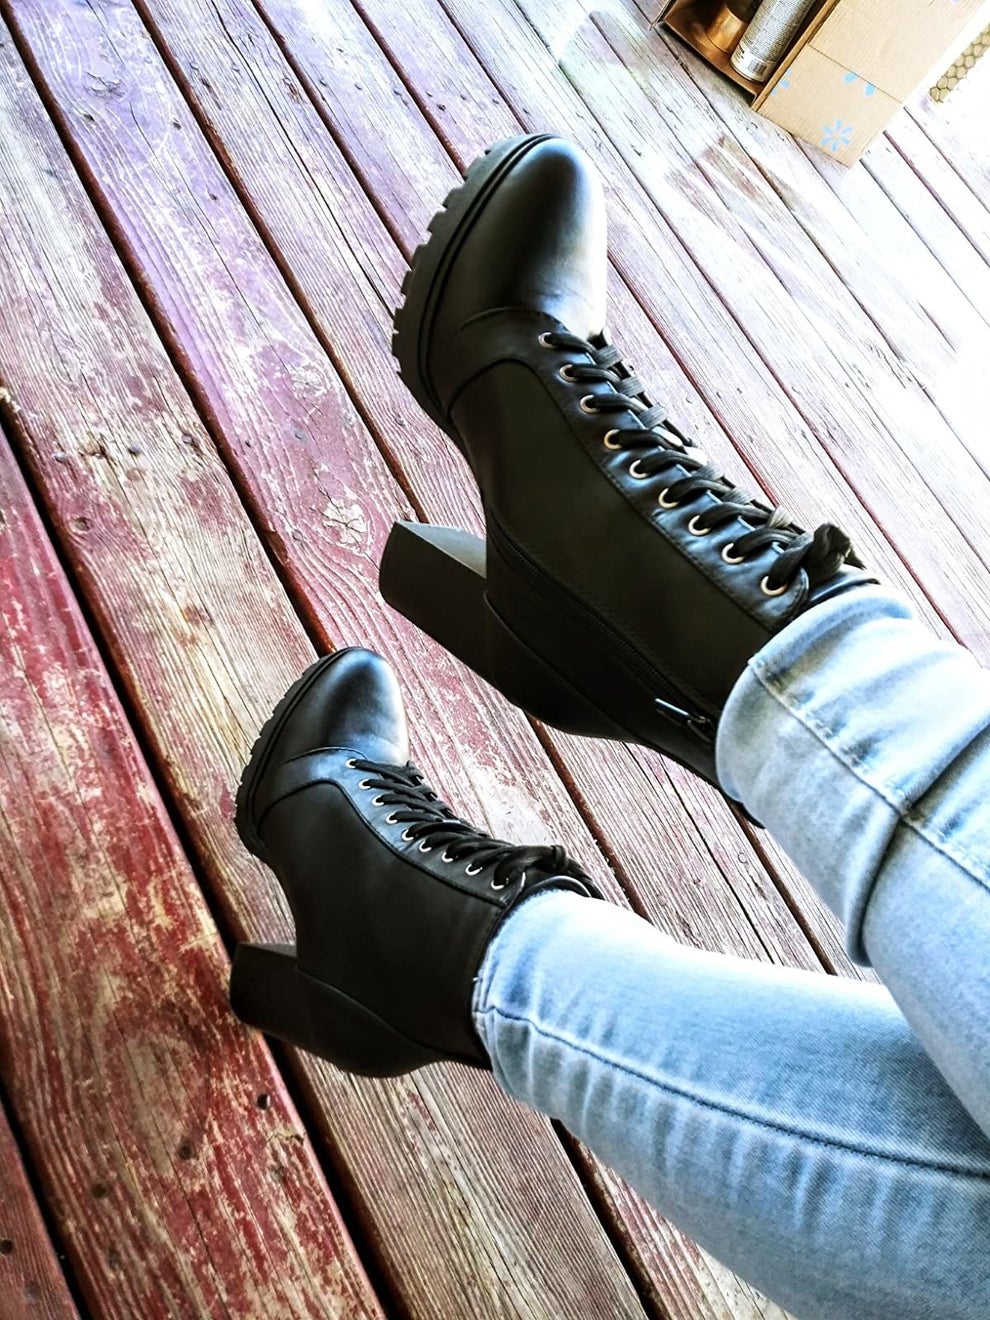 22 Boots That Reviewers Actually Swear By